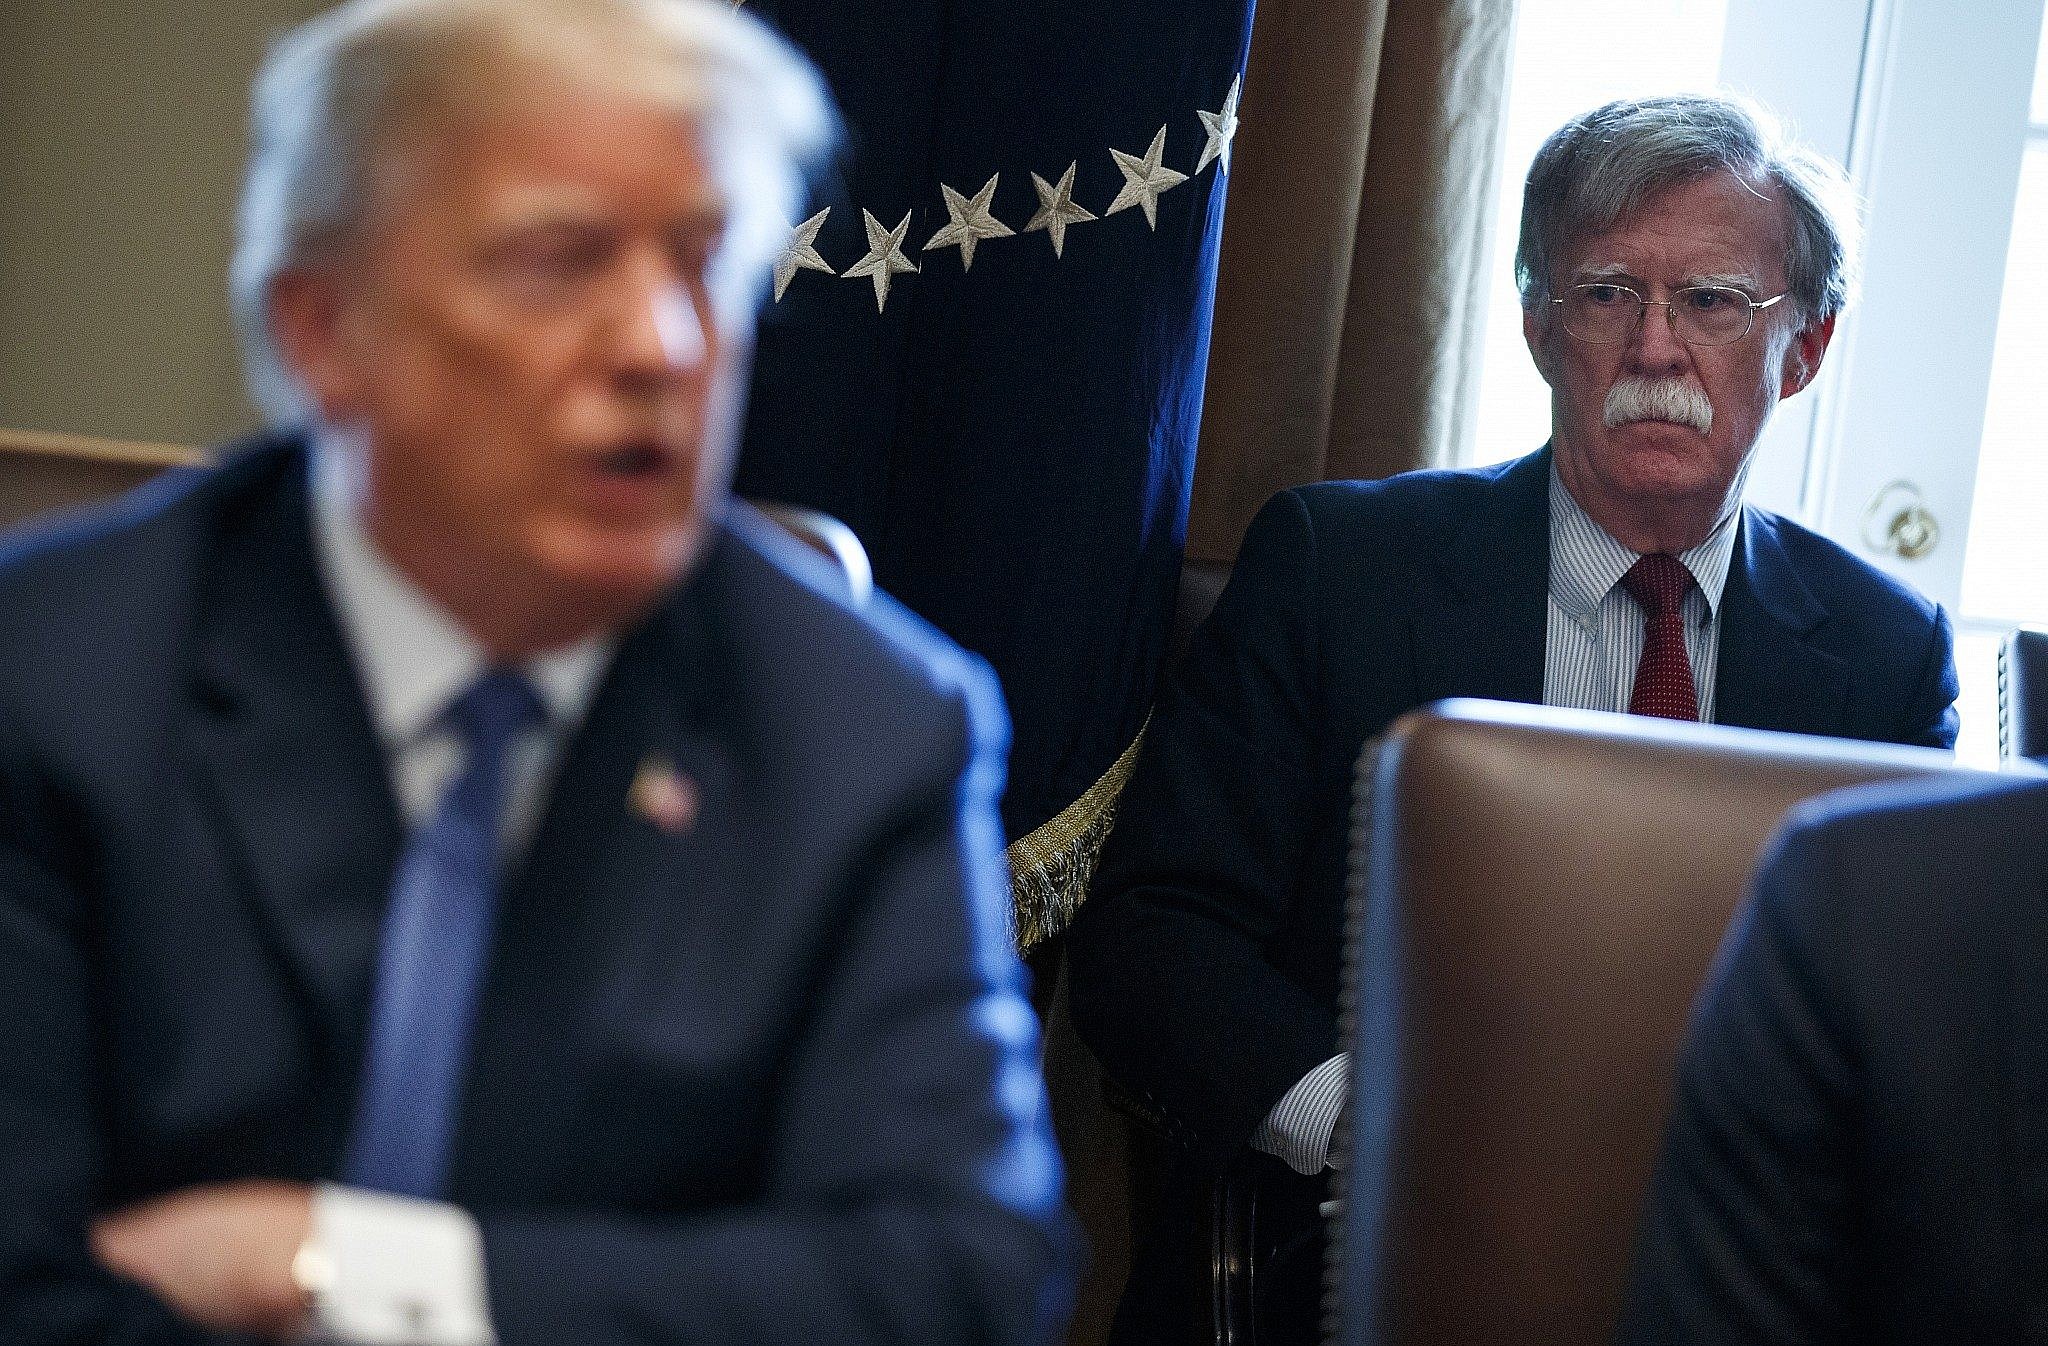 Bolton takes the helm on national security at time of tumult | The Times of Israel2048 x 1346